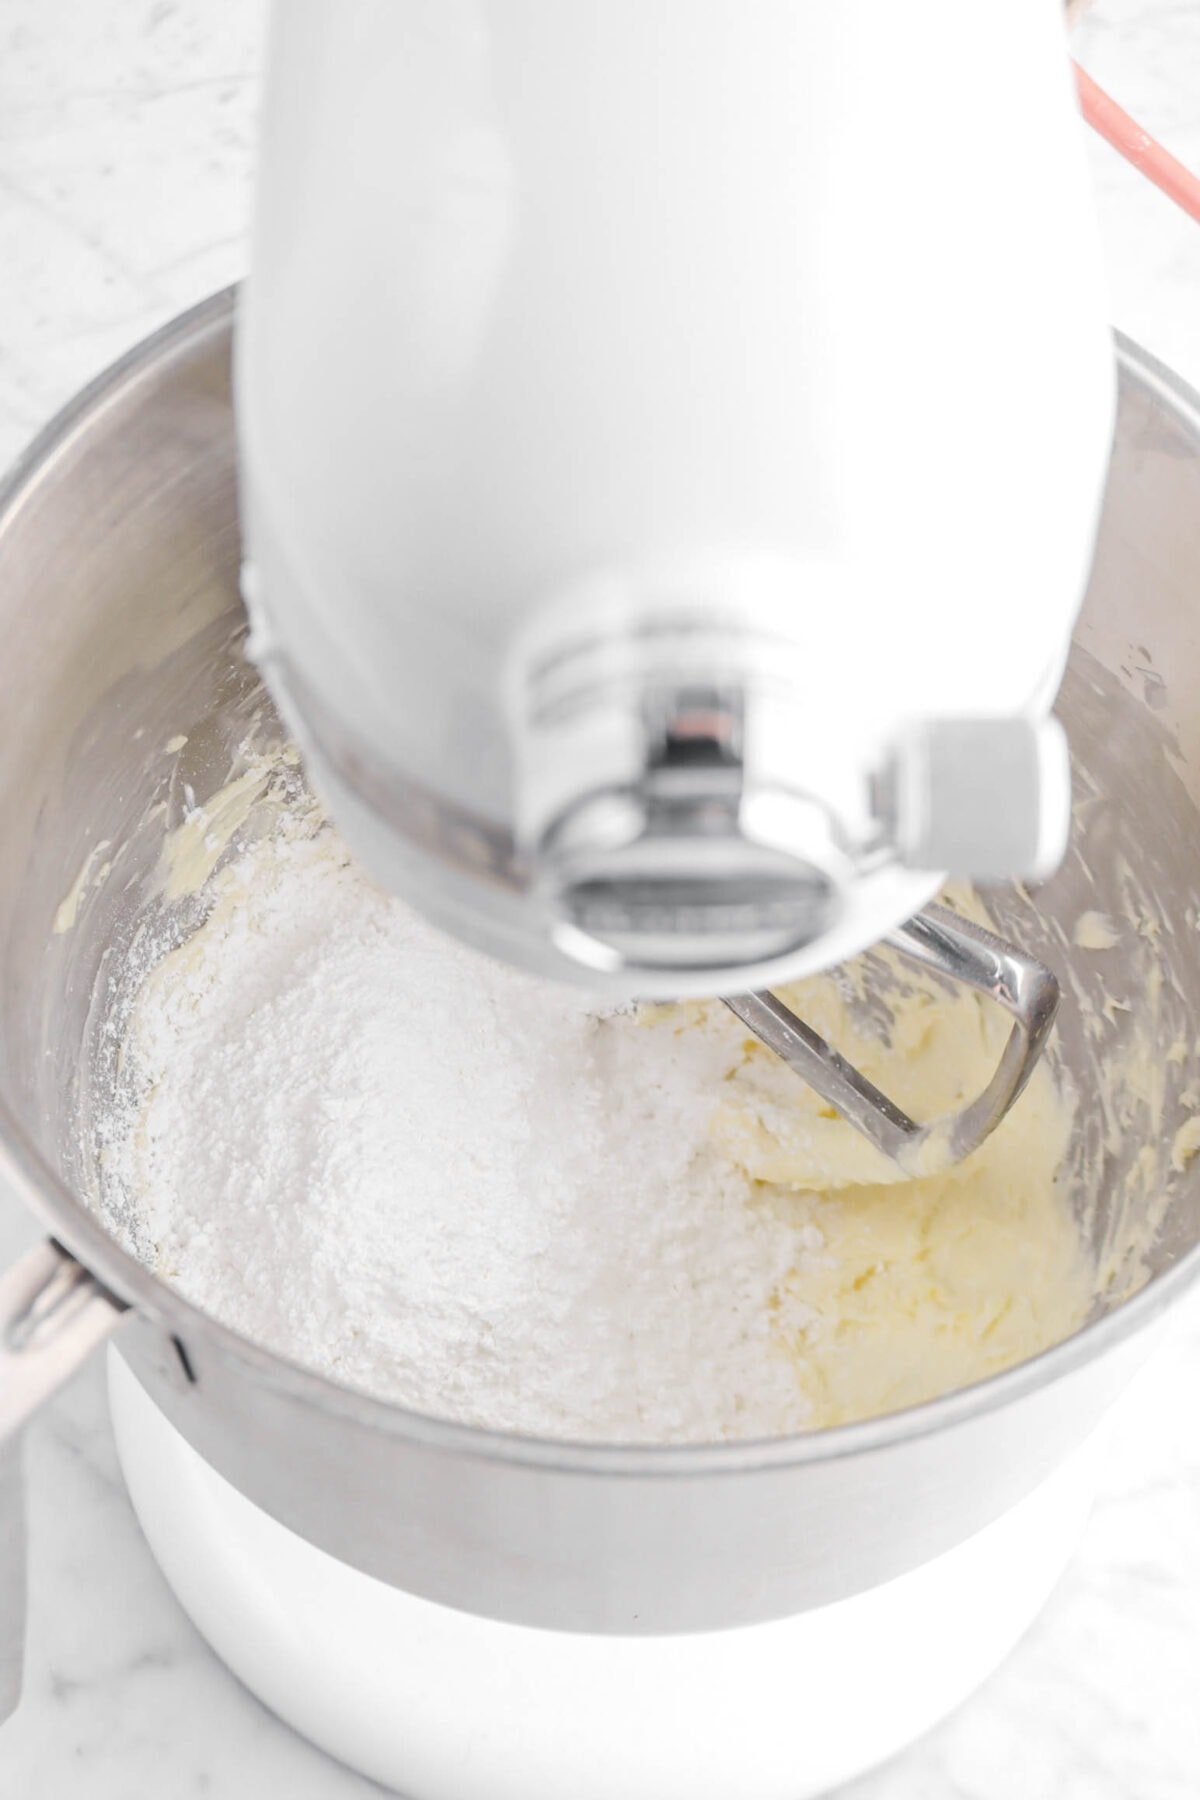 powdered sugar and creamed butter in stand mixer